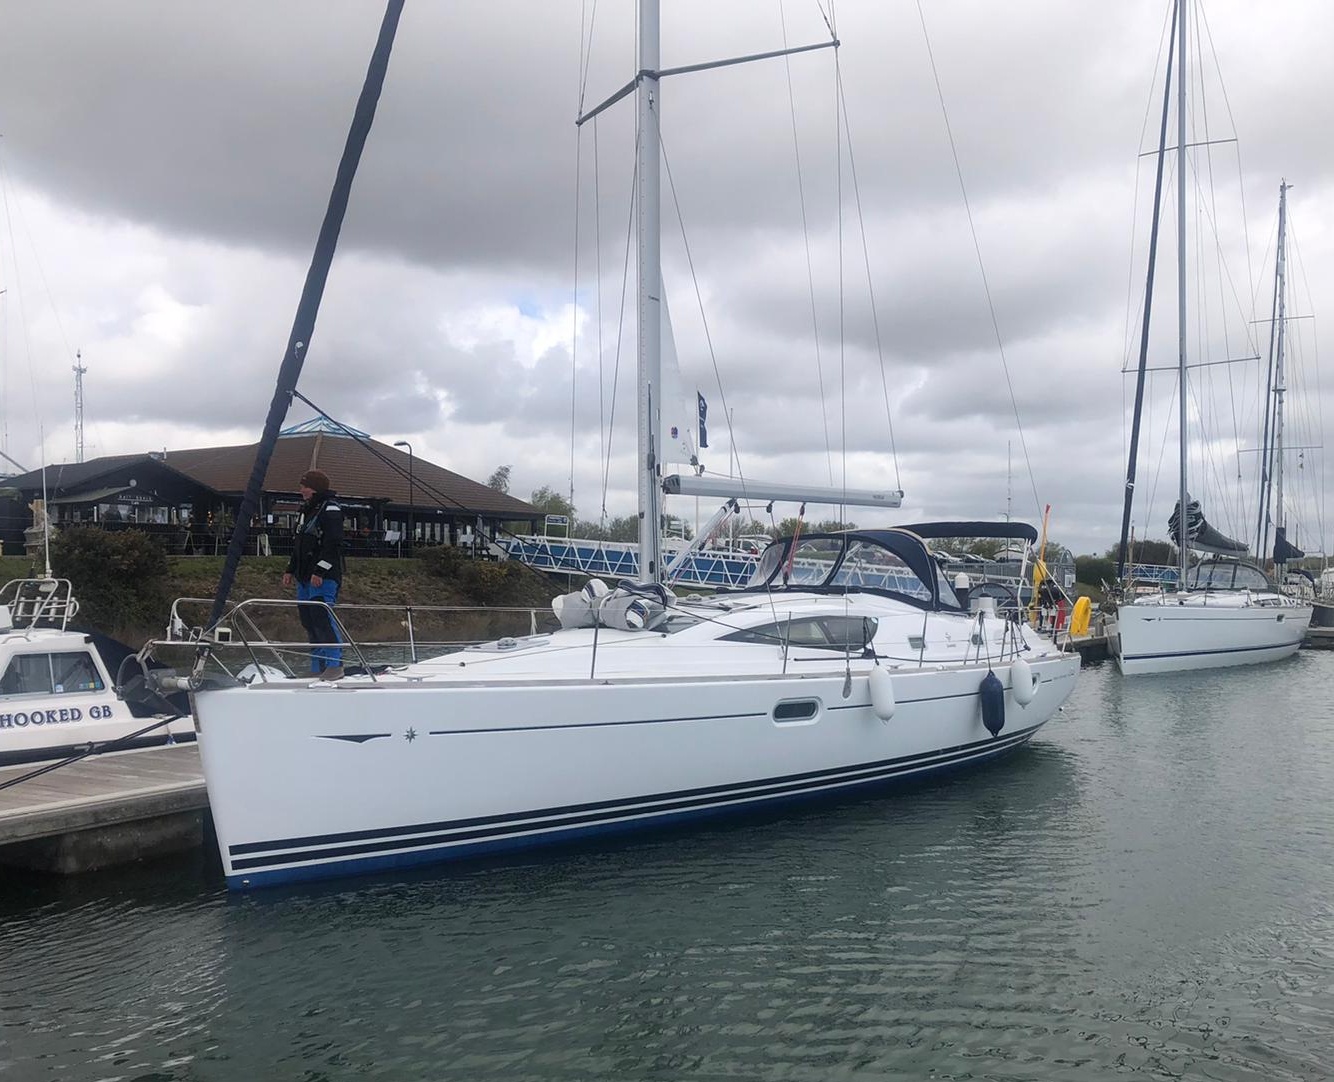 Jeanneau 42 DS yacht moored up and ready for delivery to Wales.